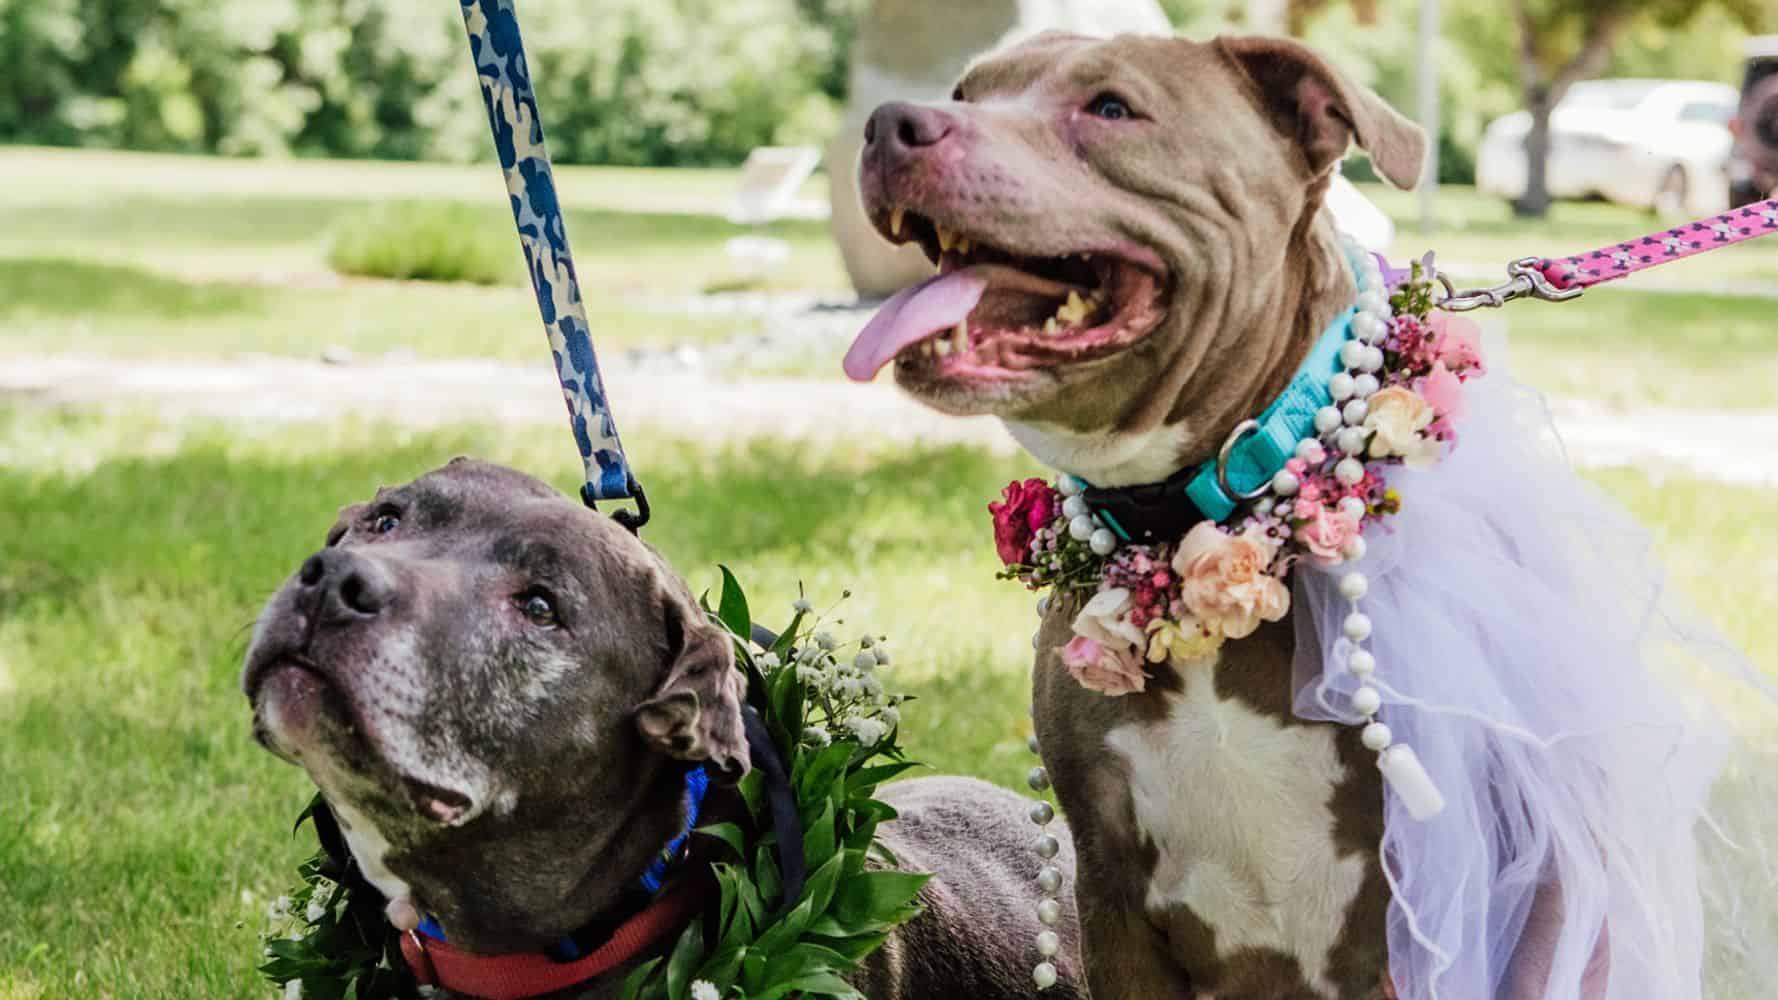 Shelter Dogs Who Must Be Adopted Together Tie The Knot In Sweet Wedding Ceremony | HuffPost Latest News